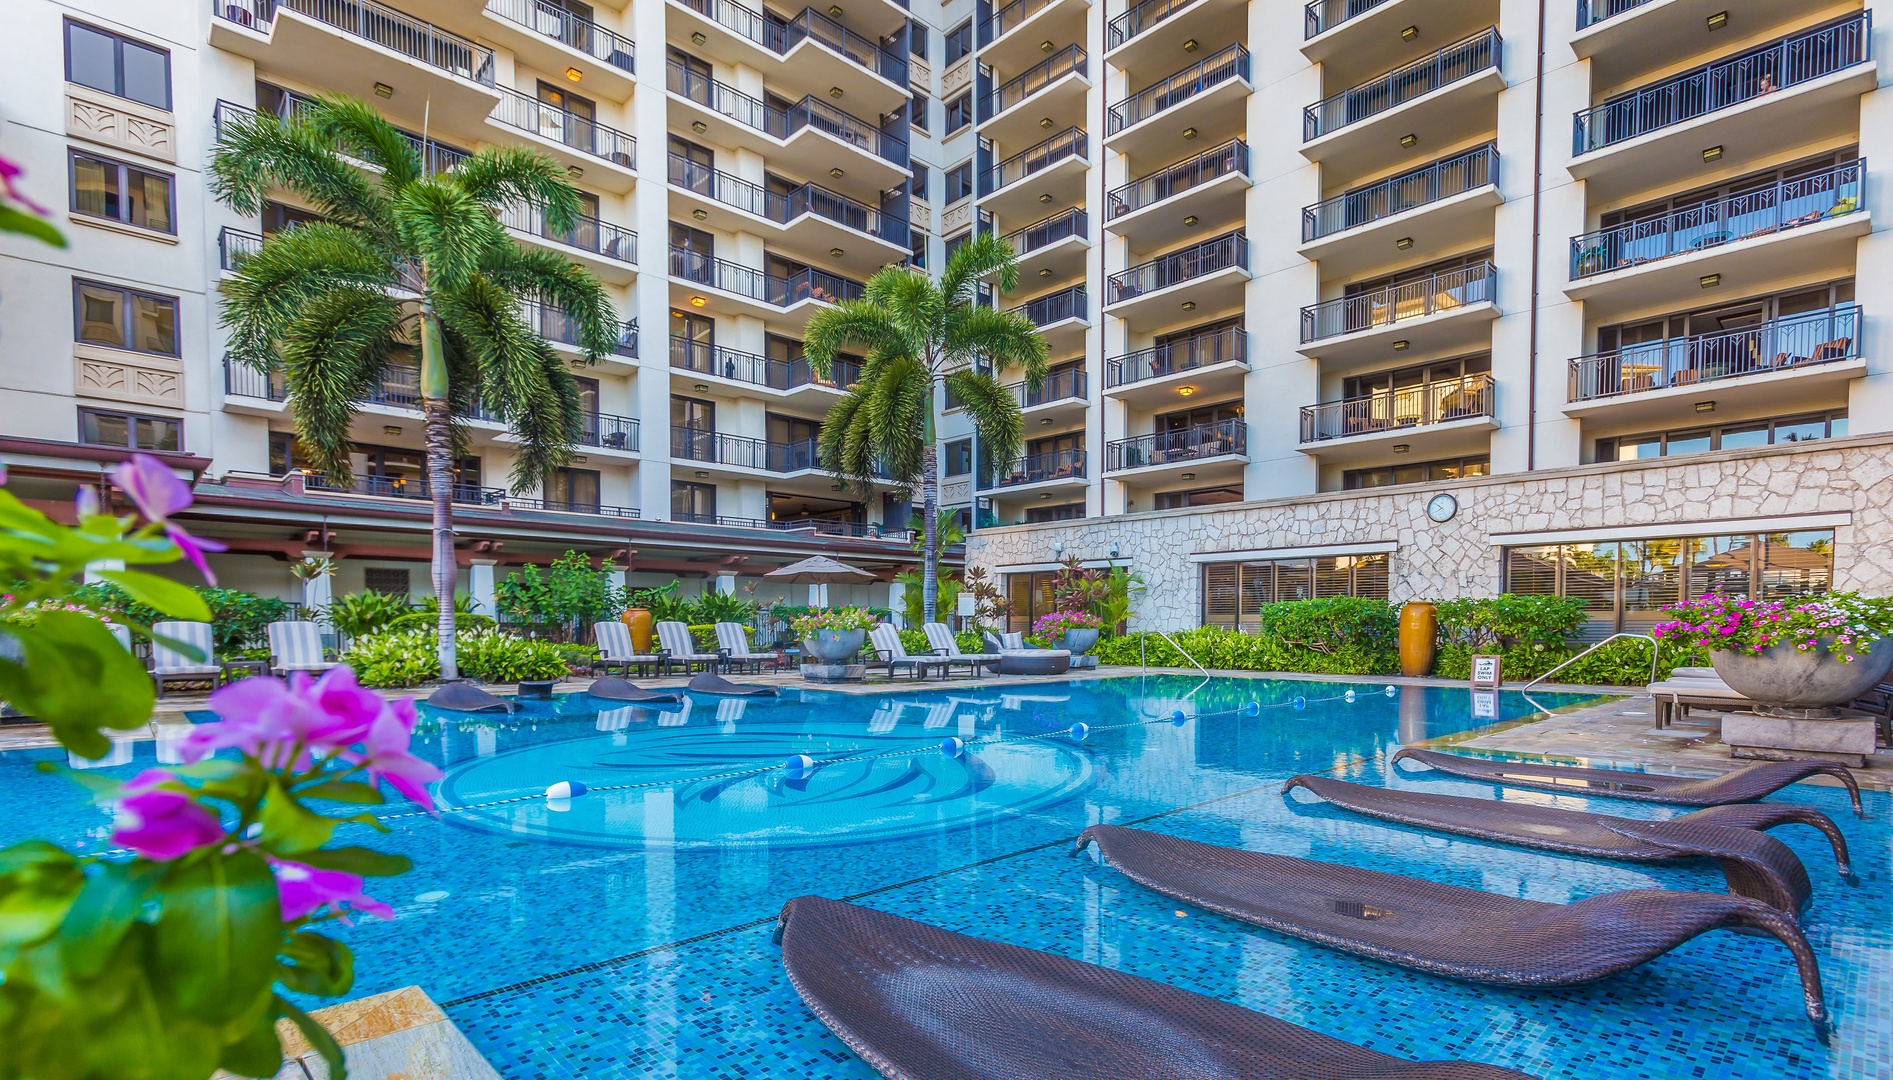 Kapolei Vacation Rentals, Ko Olina Beach Villas B602 - The pool with relaxing water loungers.